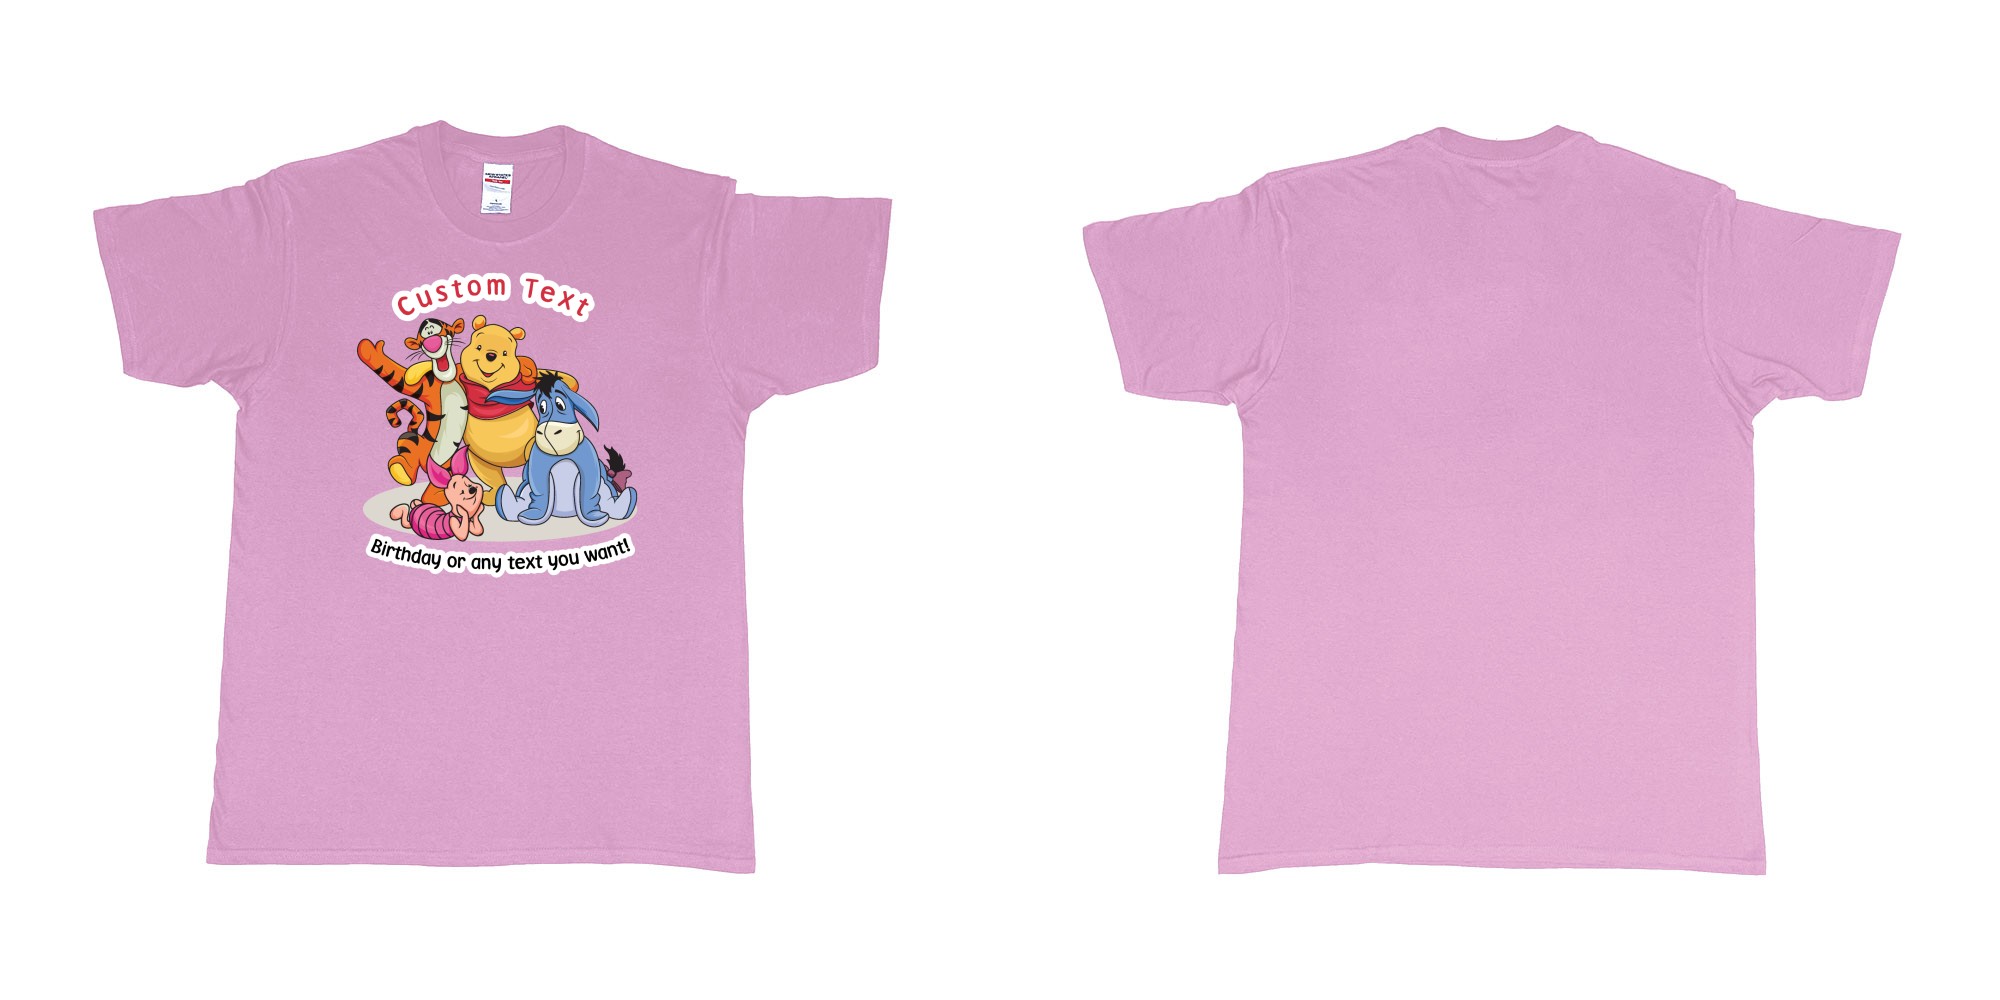 Custom tshirt design winnie the pooh and friend in fabric color light-pink choice your own text made in Bali by The Pirate Way